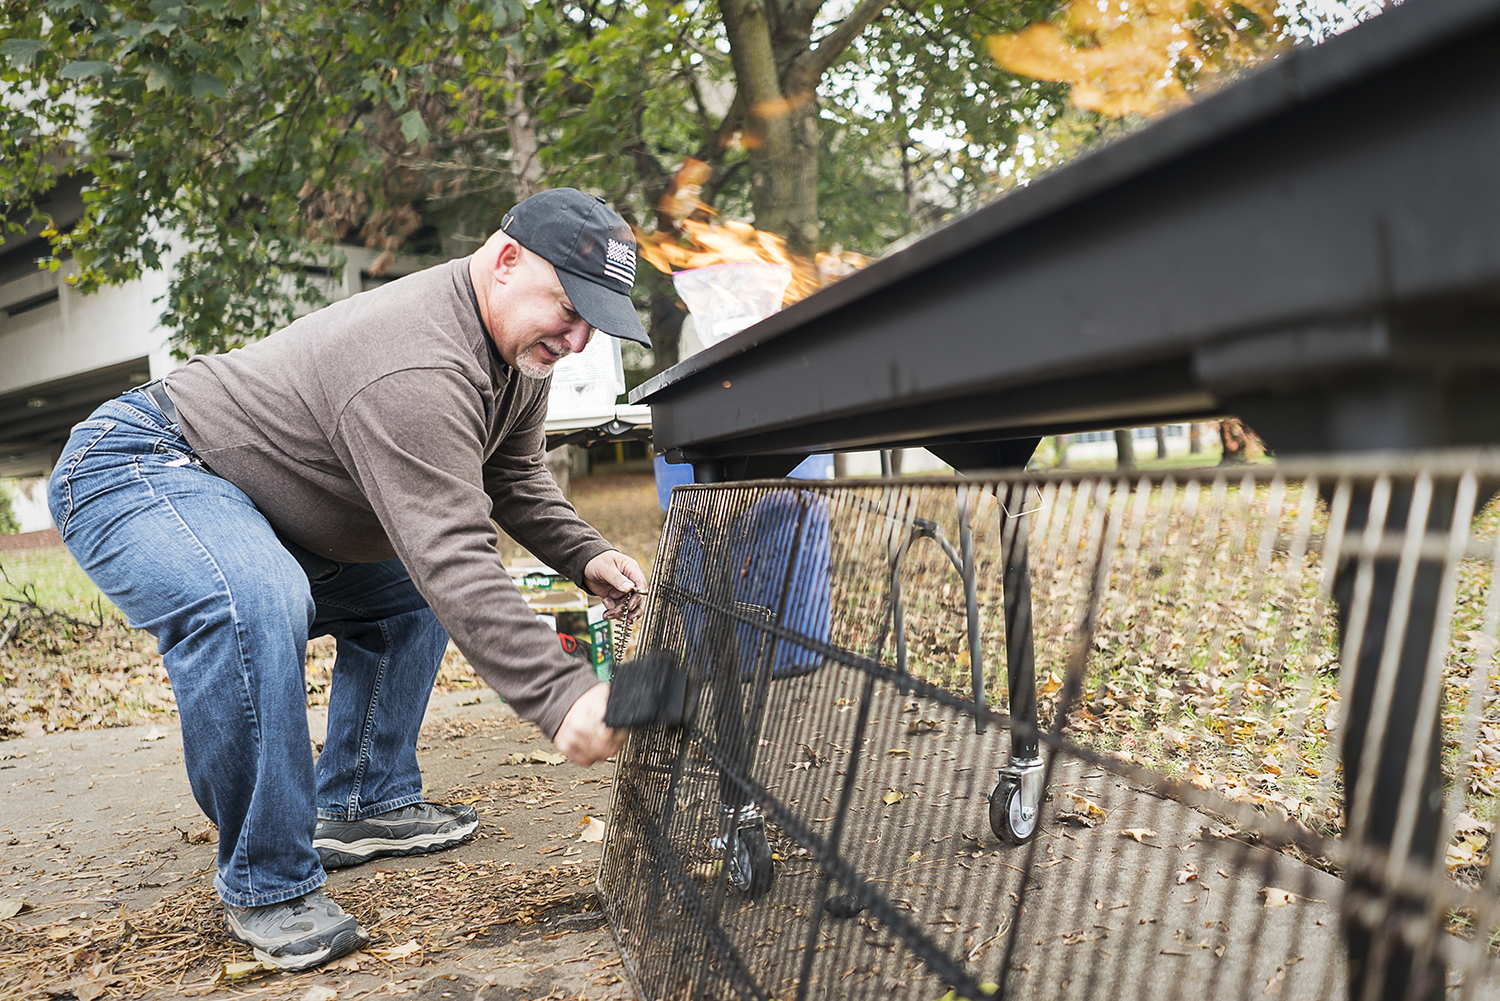 Steven Moore, 52, of Davison cleans the grate of the large grill at the Flint Community Cookout at the Riverbank Park. Moore, a retired police officer, enjoys being able to connect with the community in a positive way, which wasn't always the case wh